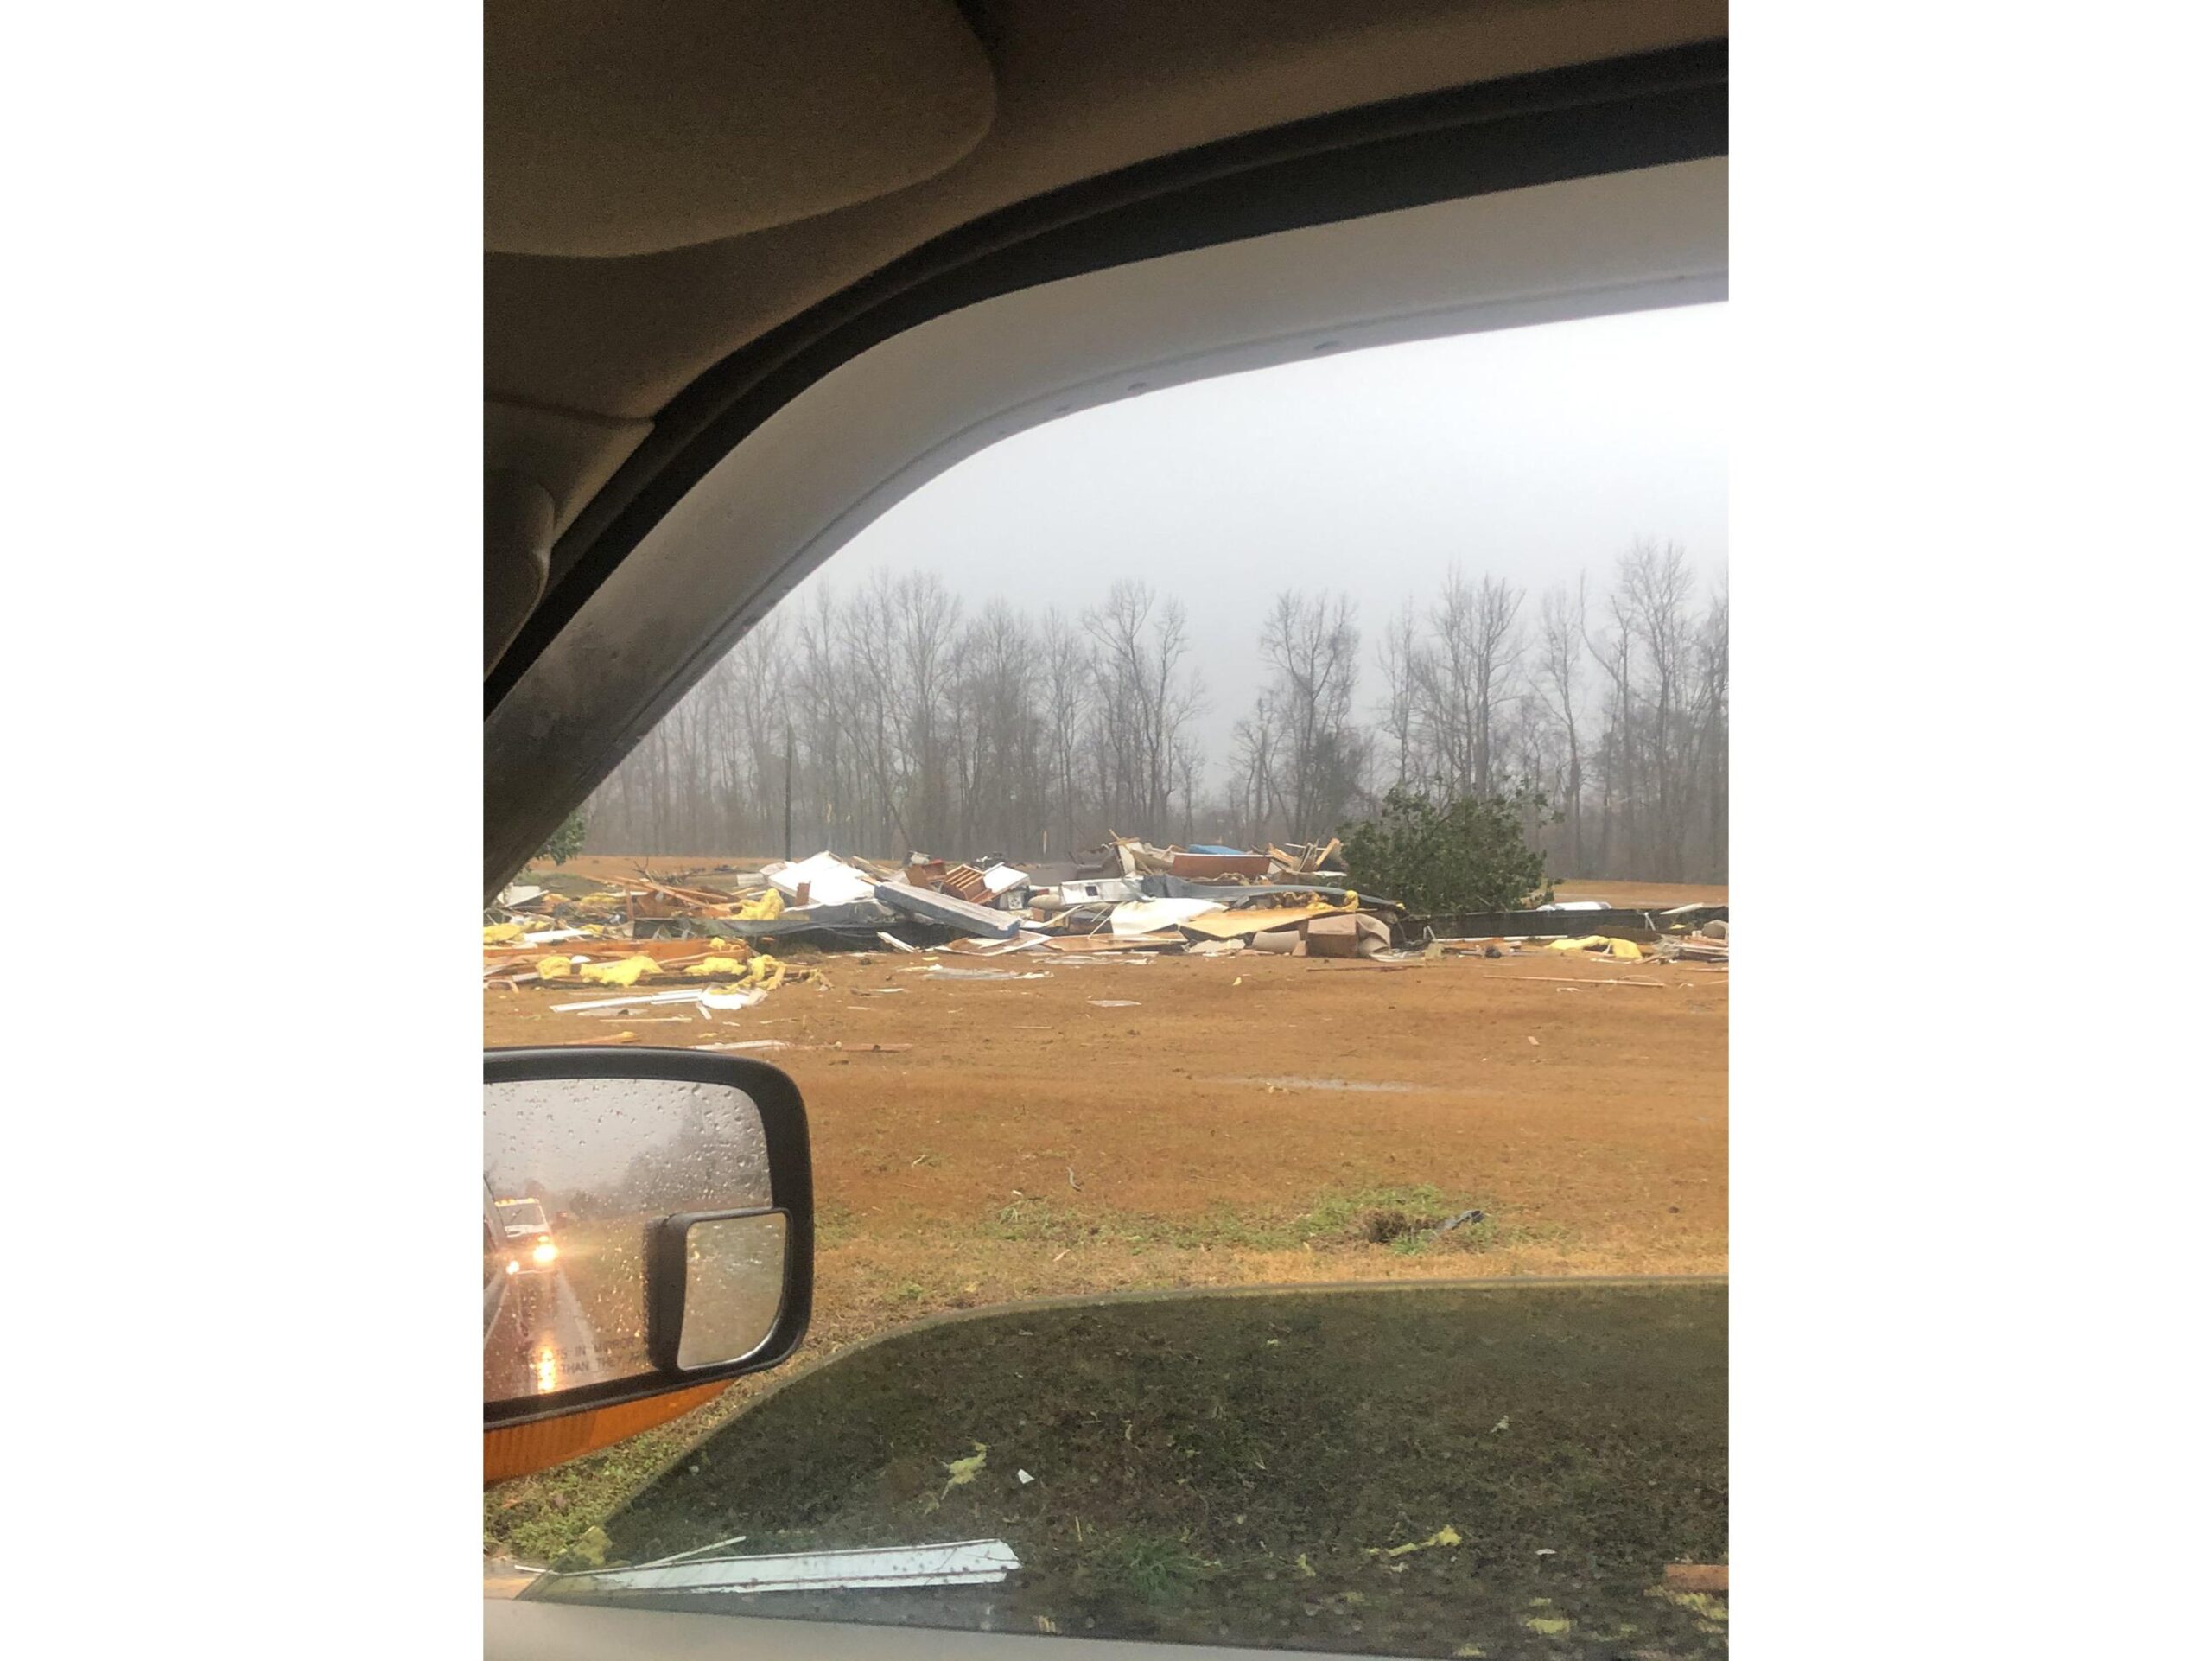 Tornado kills at least 1 person in west Alabama, several more injured